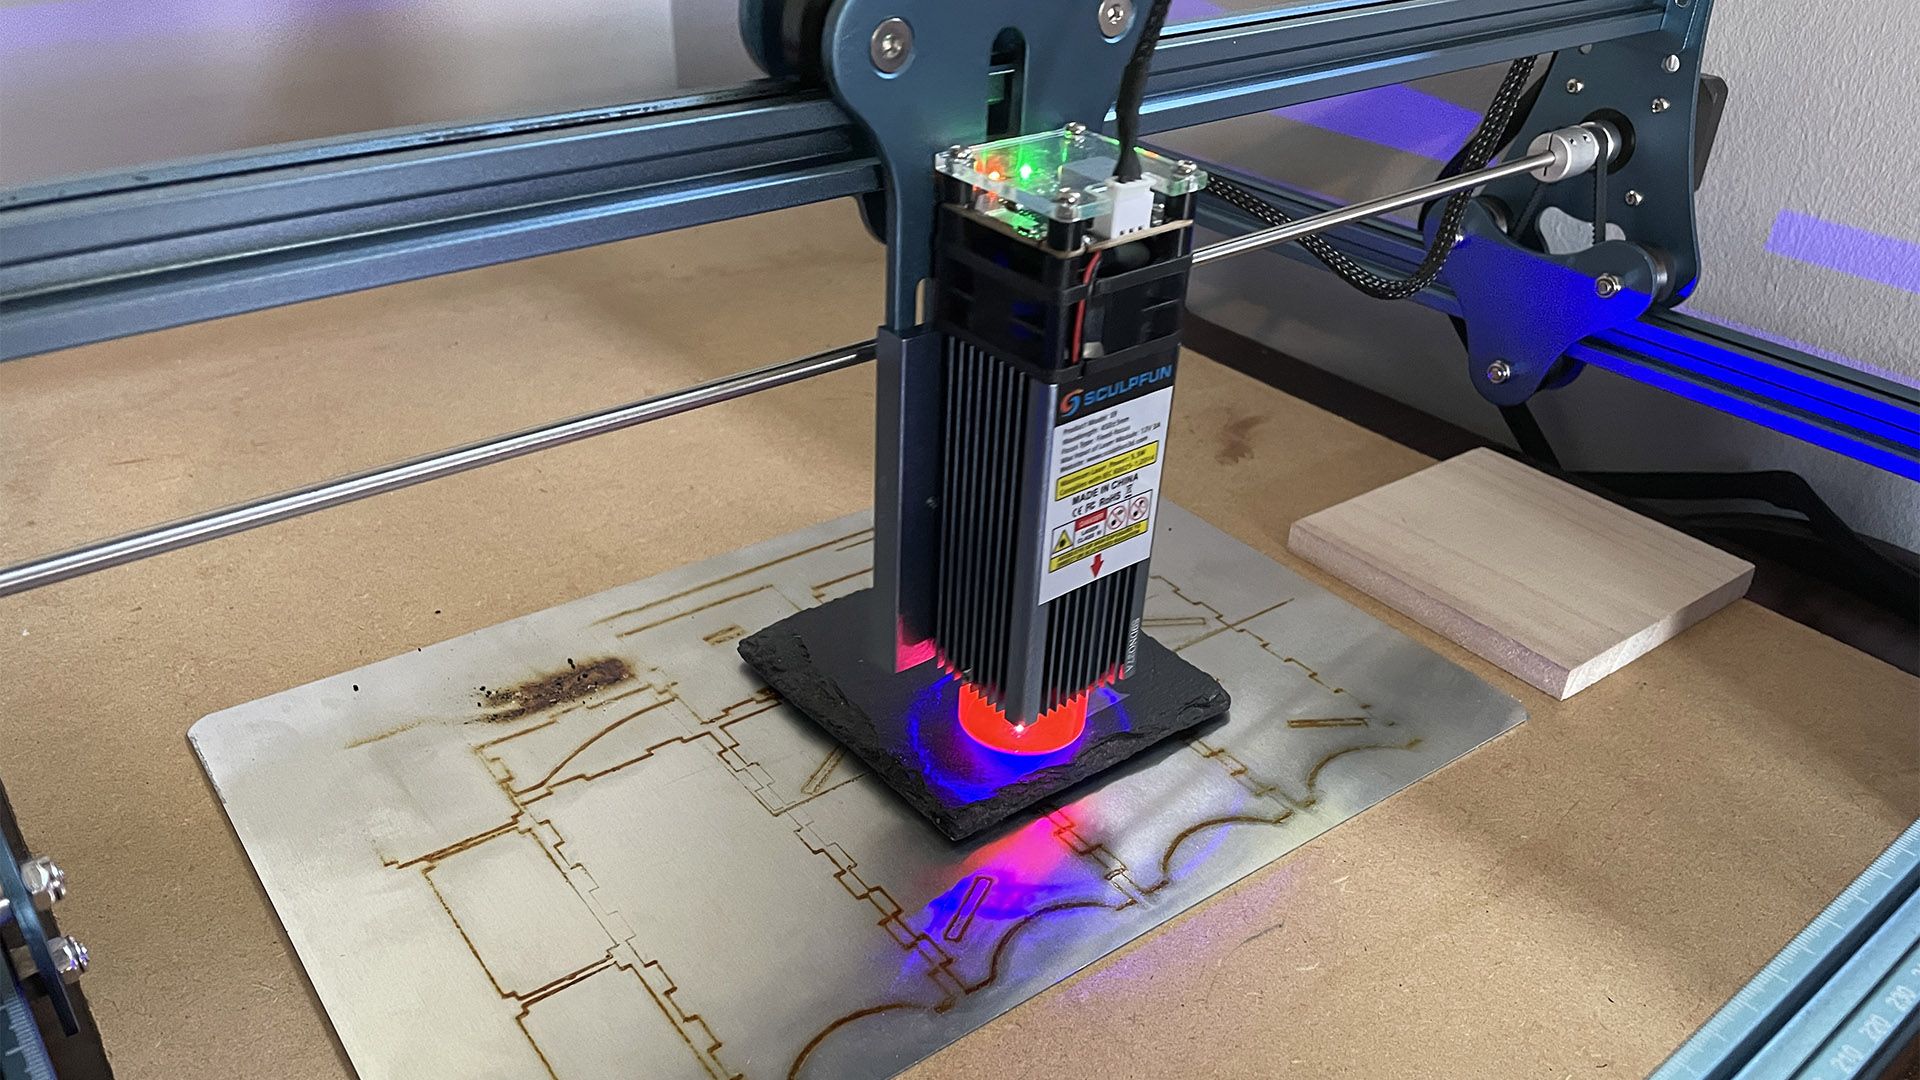 Laser engravings within everyone's reach with SCULPFUN S9, at a